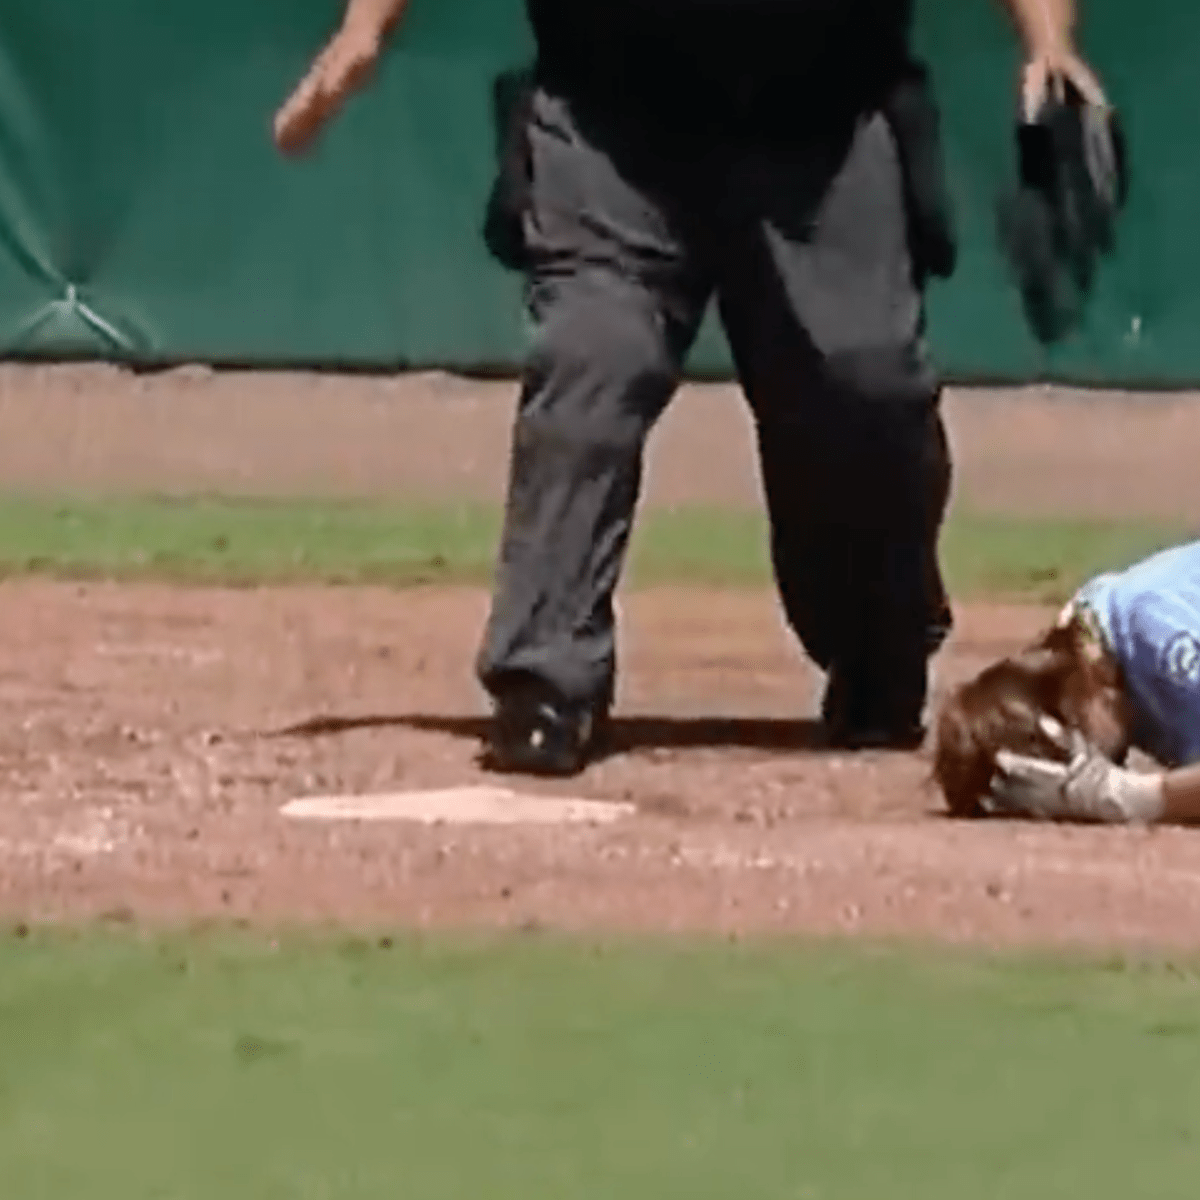 Watch Scary Hit-By-Pitch During Little League World Series